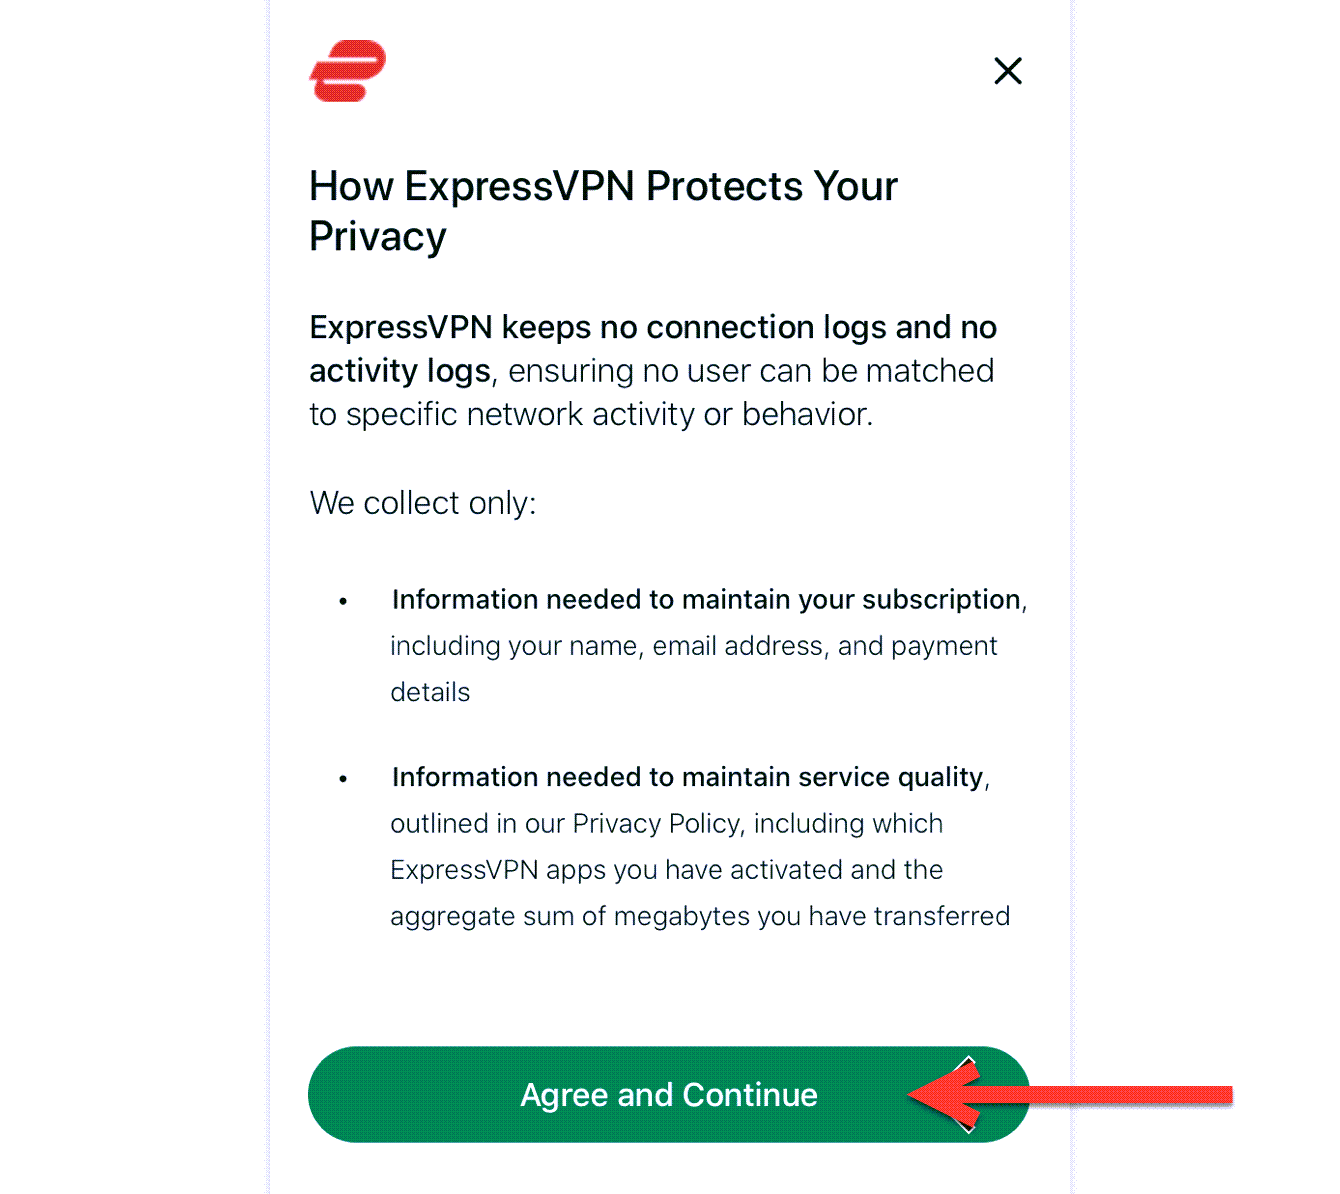 expressvpn-ios-10.0.0-protect-your-privacy-tap-agree-and-continue-in-Singapore